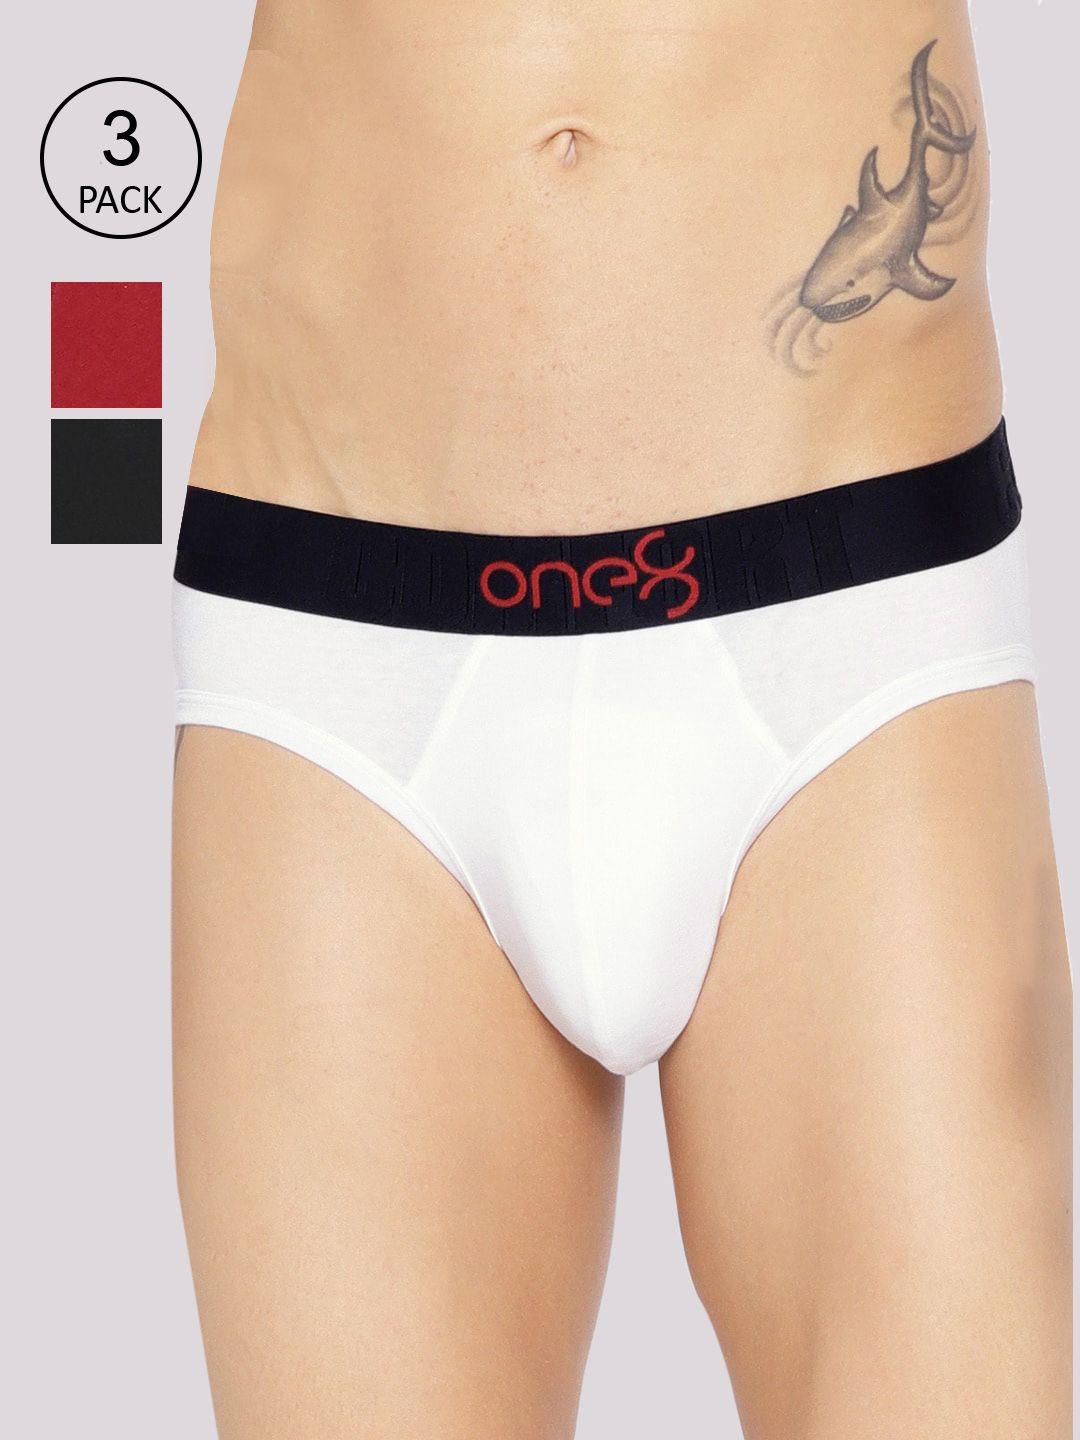 one8 by virat kohli men pack of 3 white, red and black solid cotton briefs